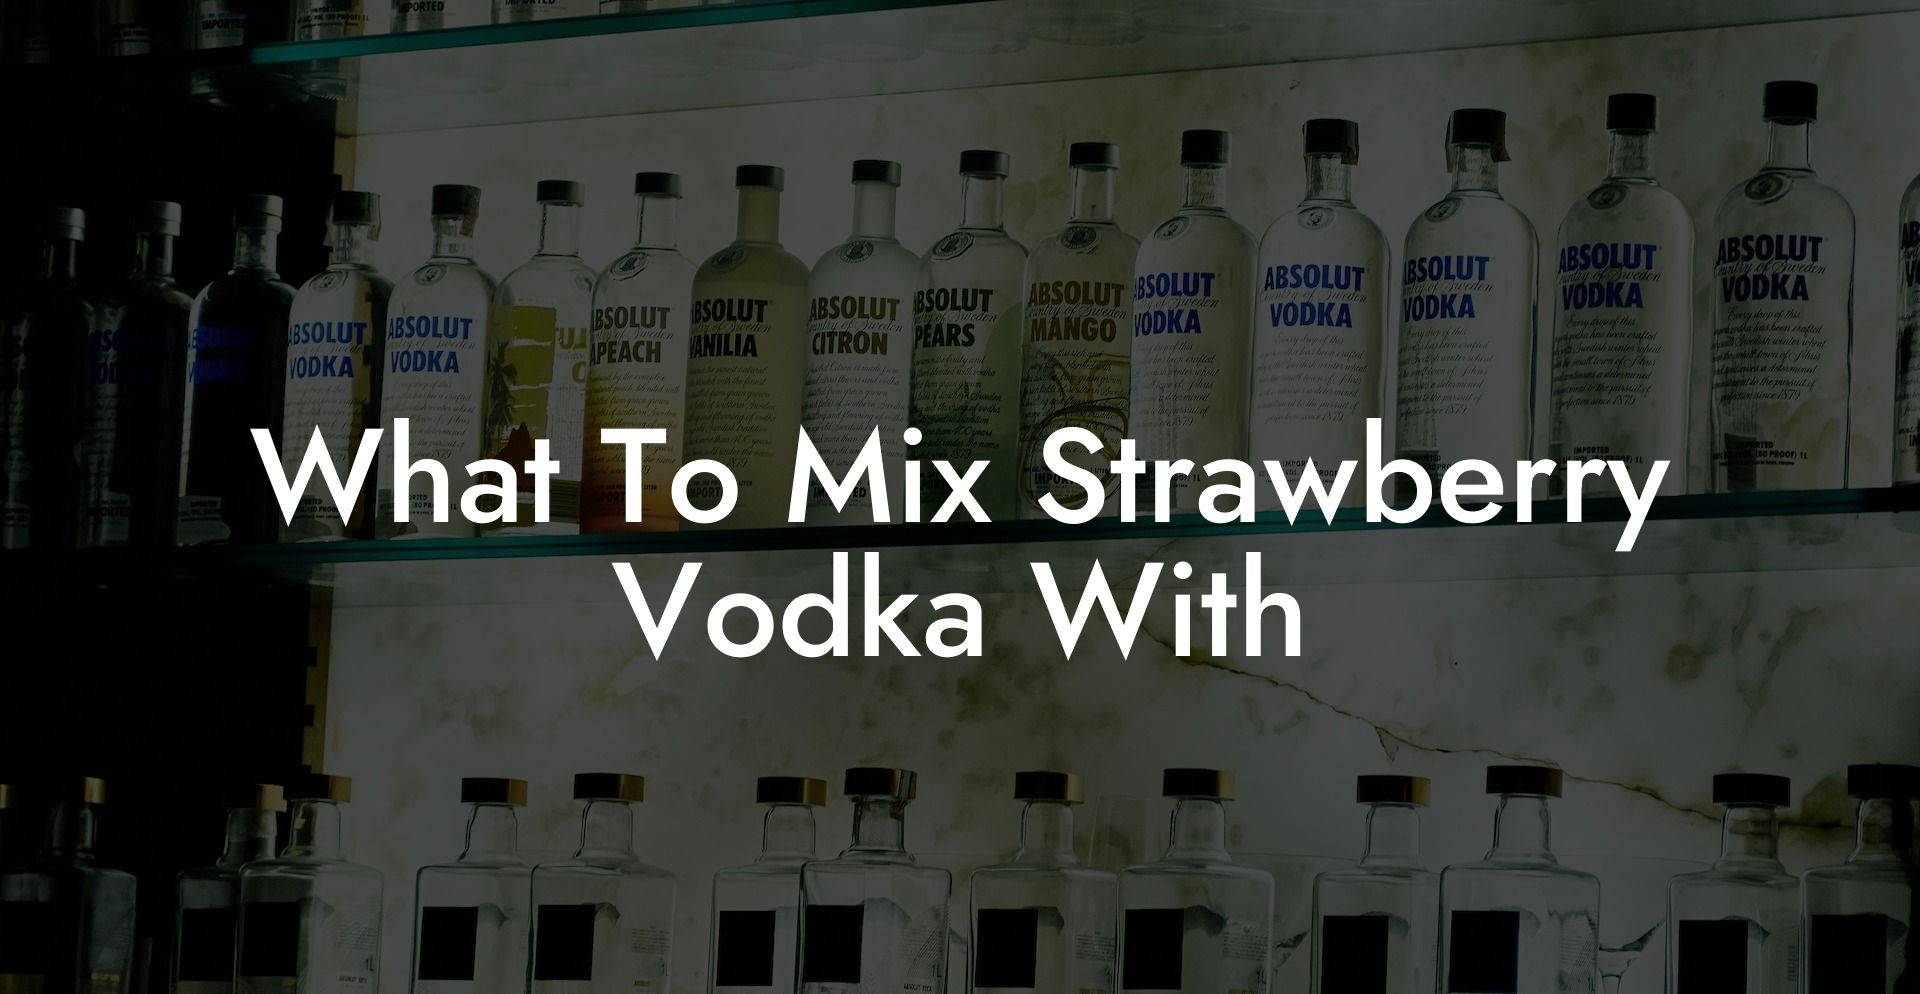 What To Mix Strawberry Vodka With